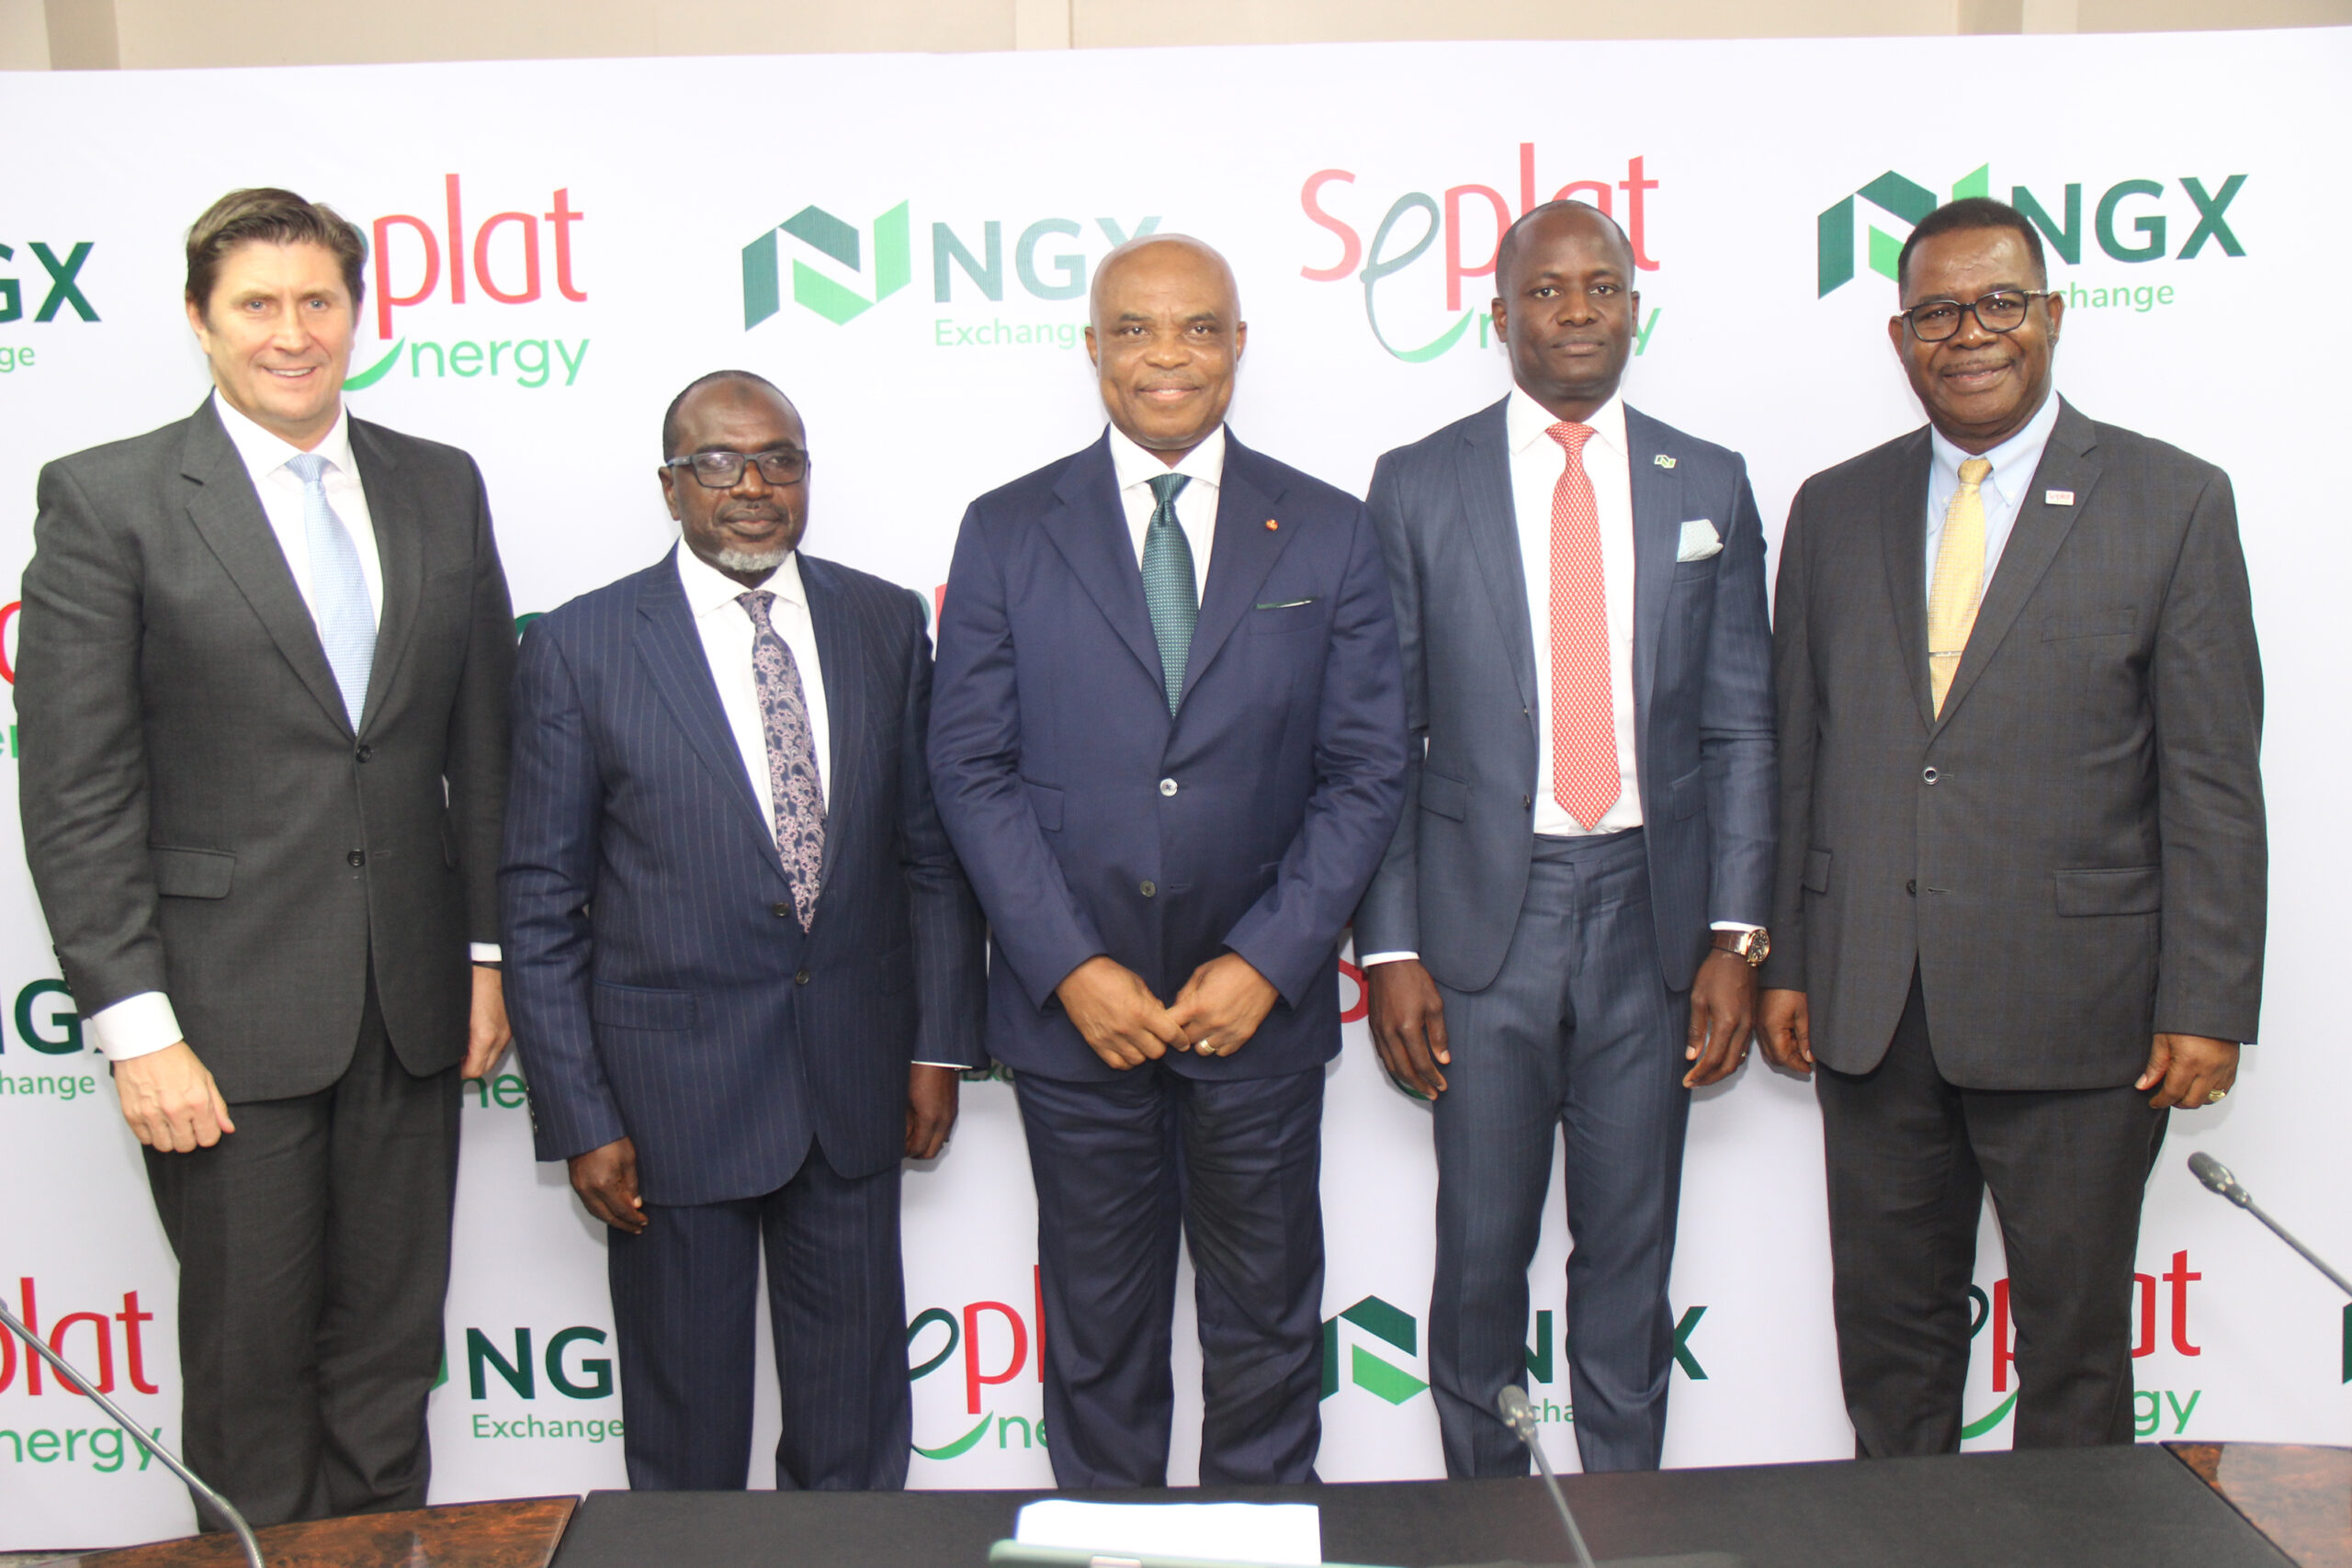  Photos: Closing Gong To Celebrate Immediate Former Chairman Of Seplat Energy And Welcome Newly Appointed Chairman On The Trading Floor Of Nigerian Exchange Limited.